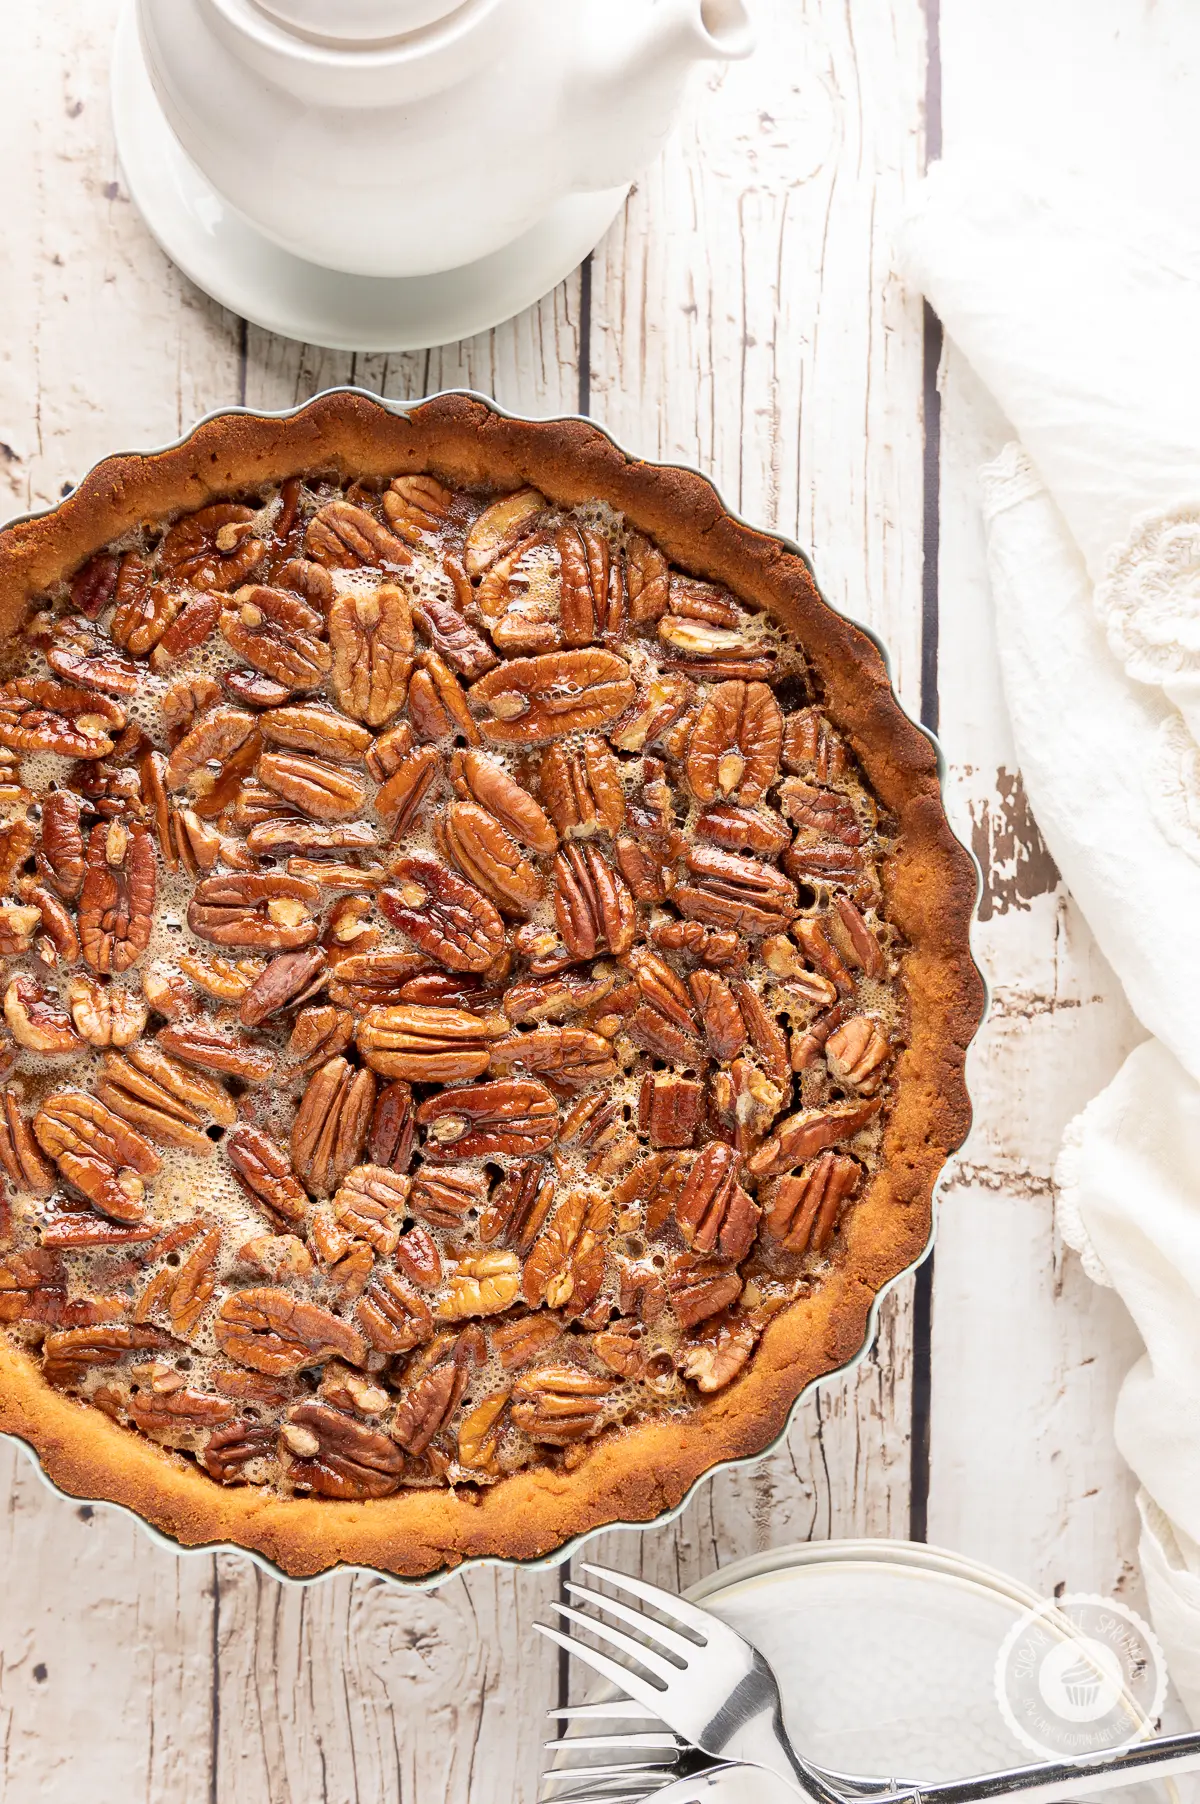 Pecan pie on a rustic wooden backdrop with white napkin, plates and a pot of hot tea